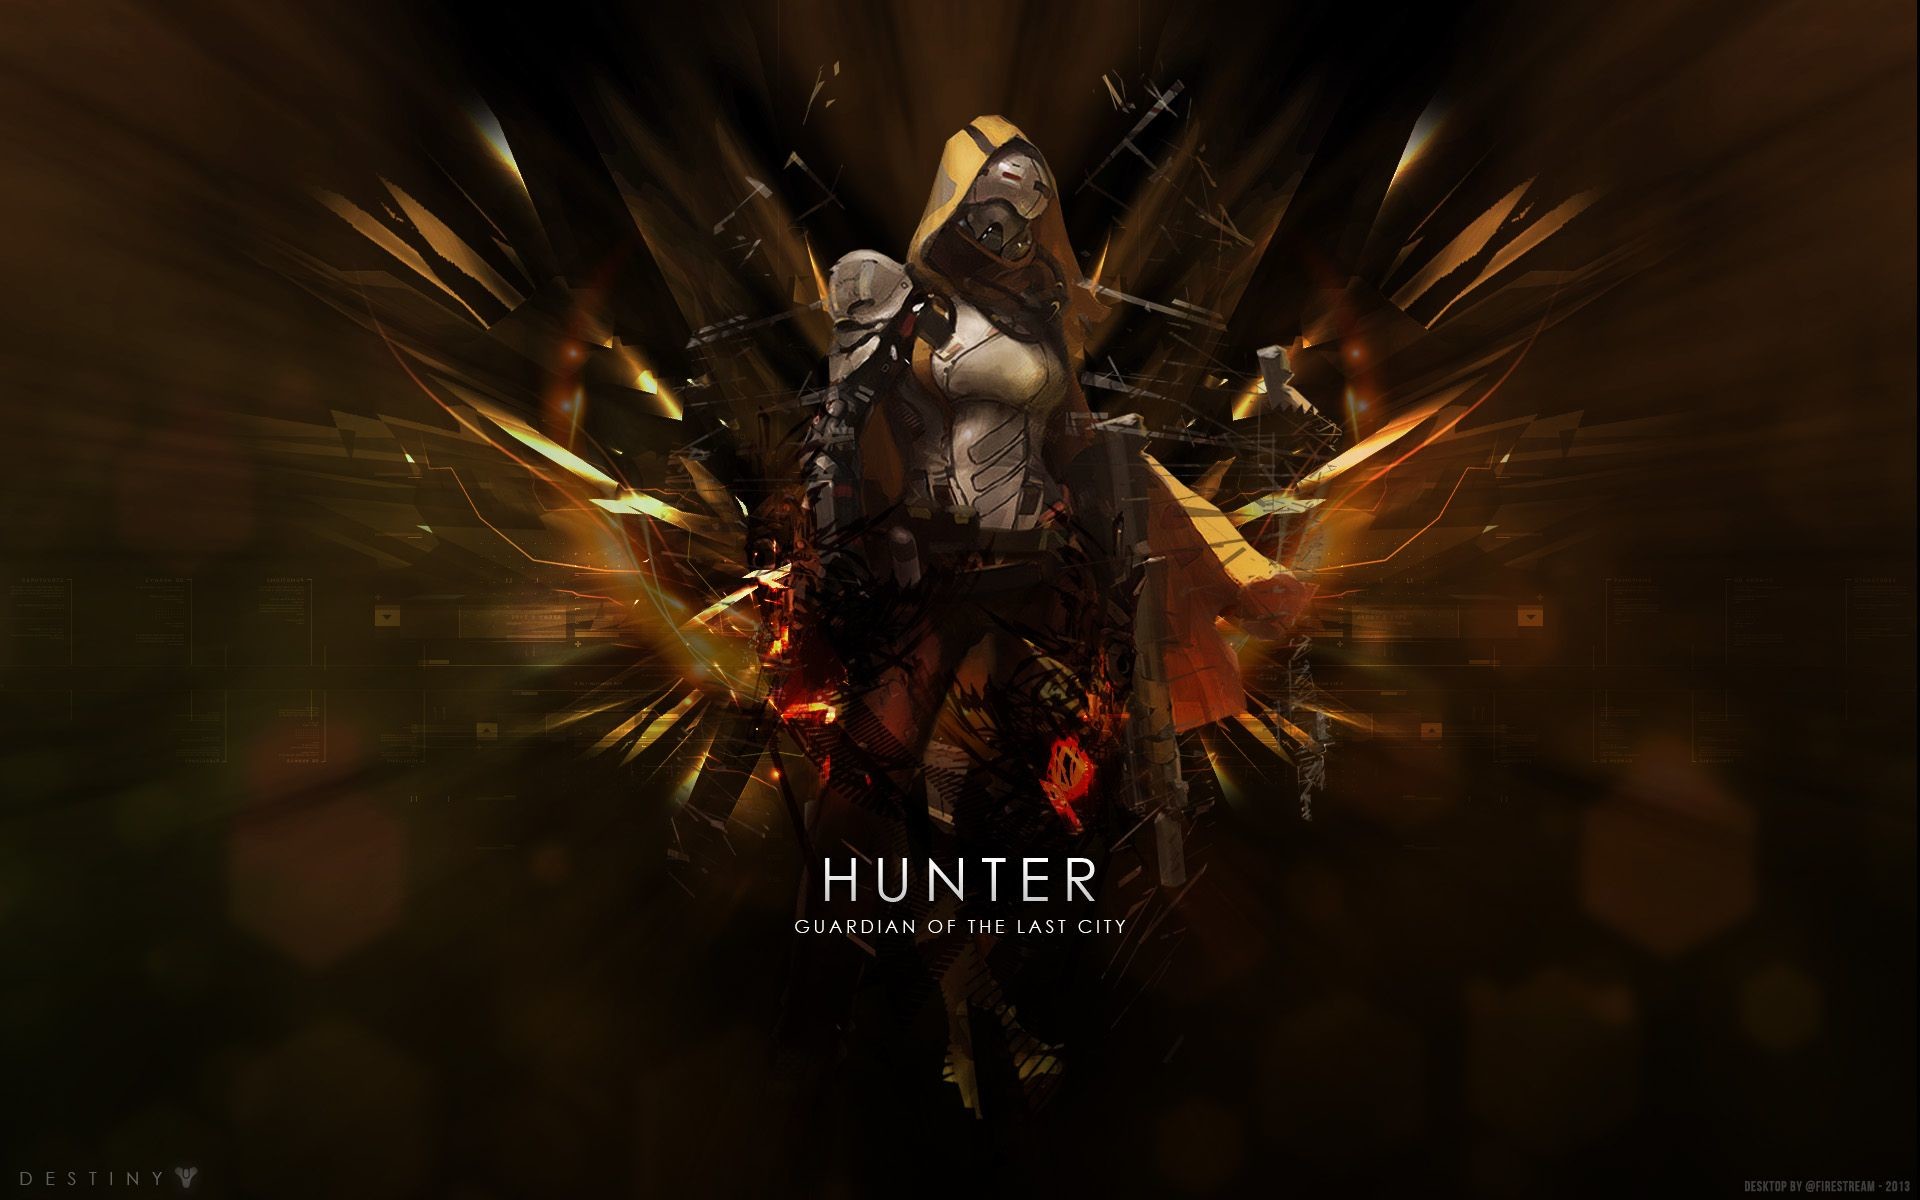 1920x1200 Destiny Hunter HD Wallpaper AWESOME THIS GAME IS FULLLLY AWESOME I AM NOT  KIDDING DID I MENTION THAT ITS AWESOME 'CAUSE IT IS AWESOME BTW IT IS  AWESOME